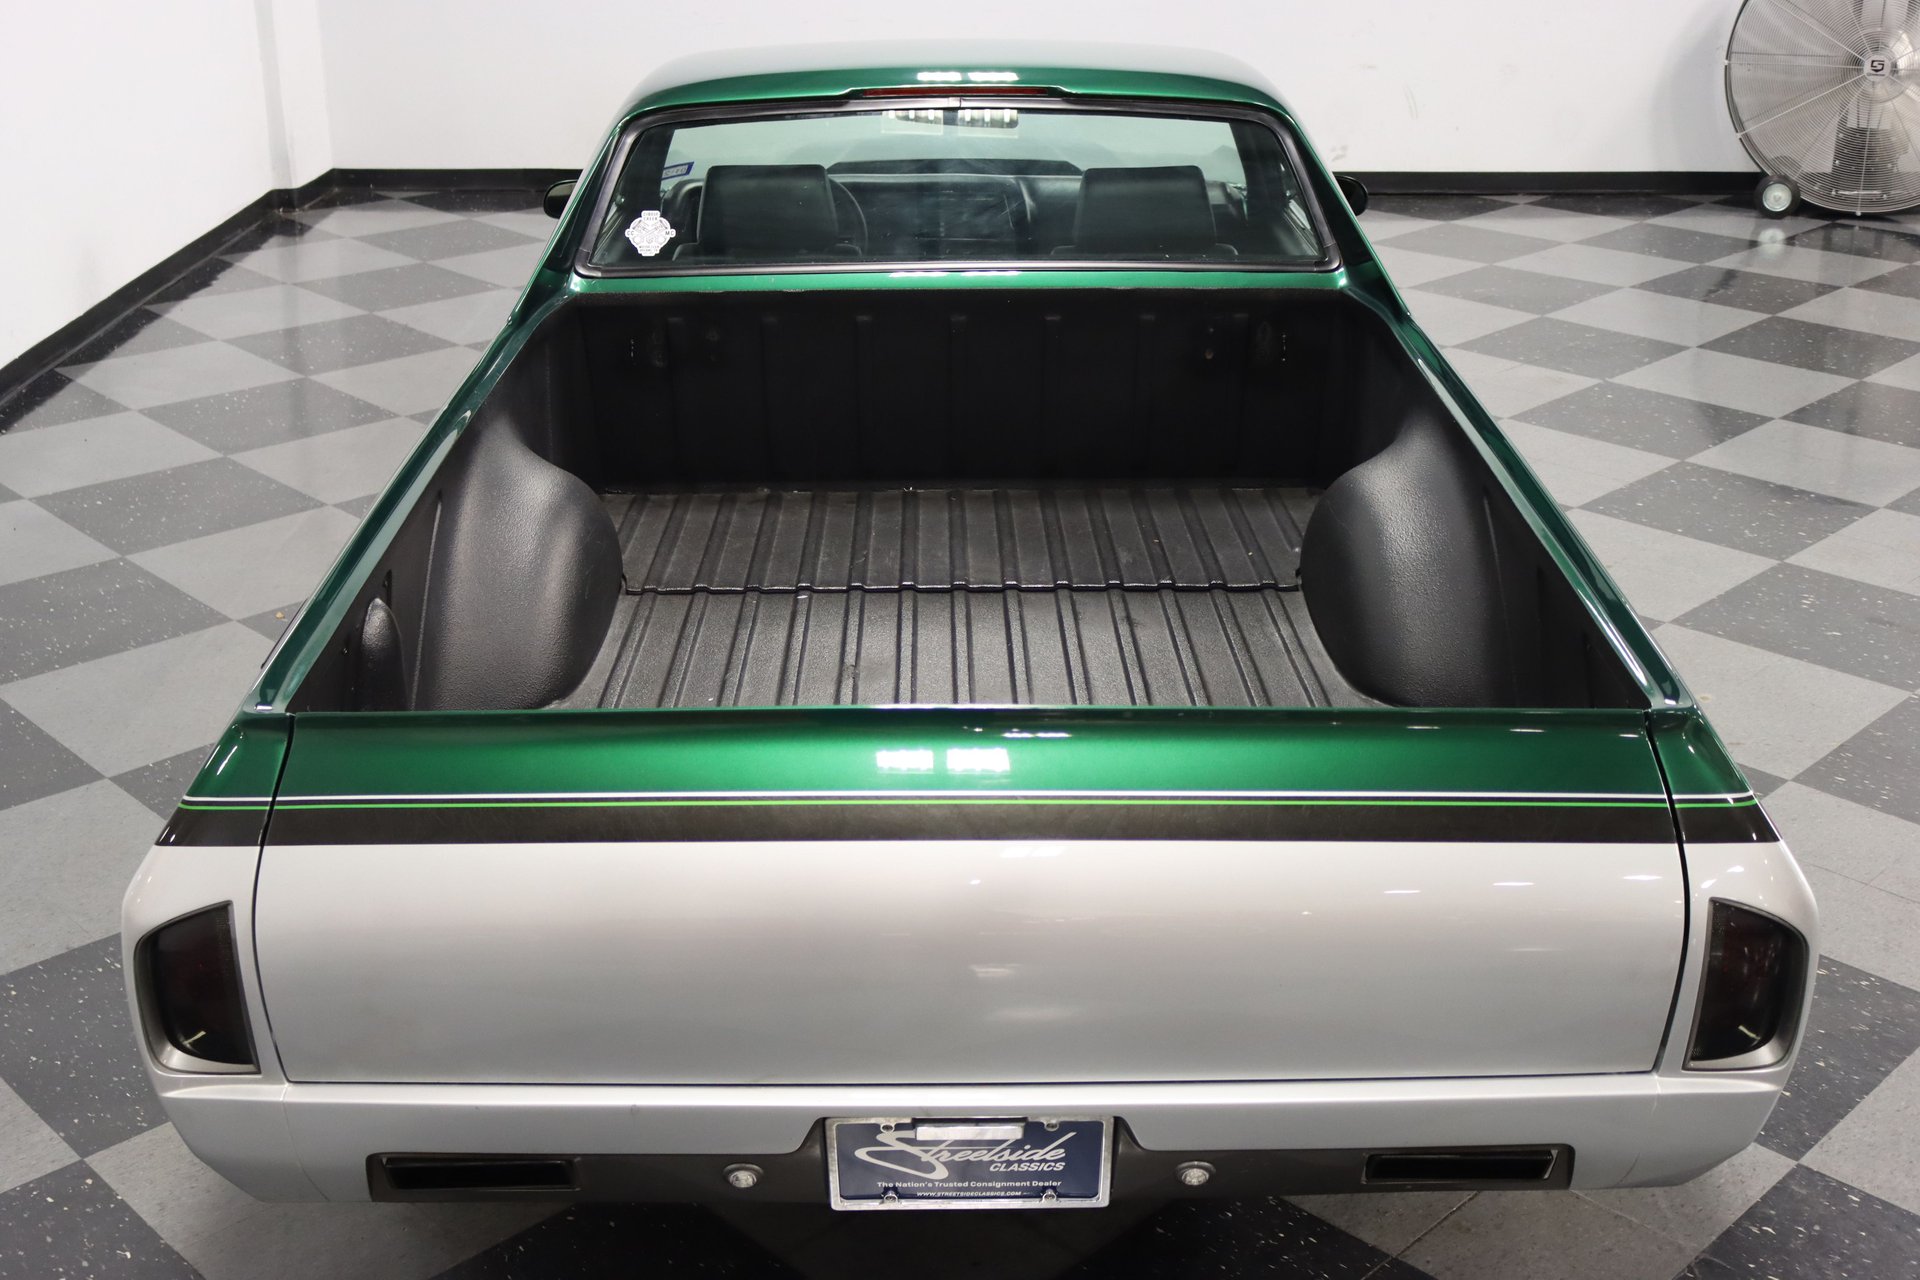 1972 el camino ss production numbers ls3 engine